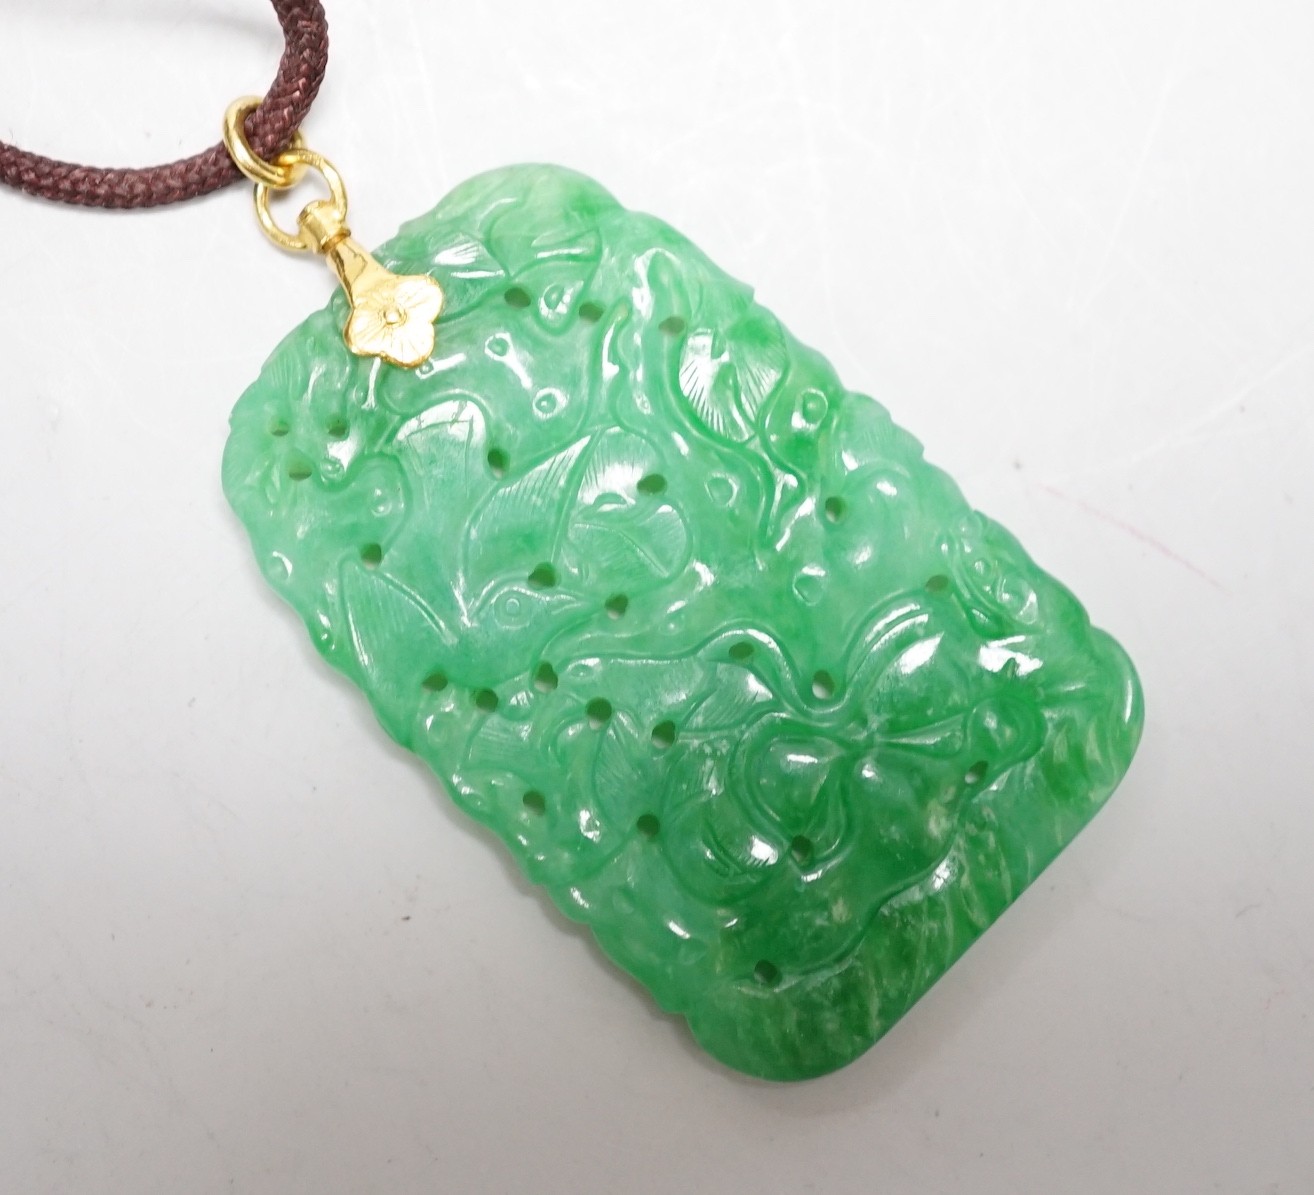 A carved Chinese jadeite pendant with pierced decoration. 5.5 x 3cm